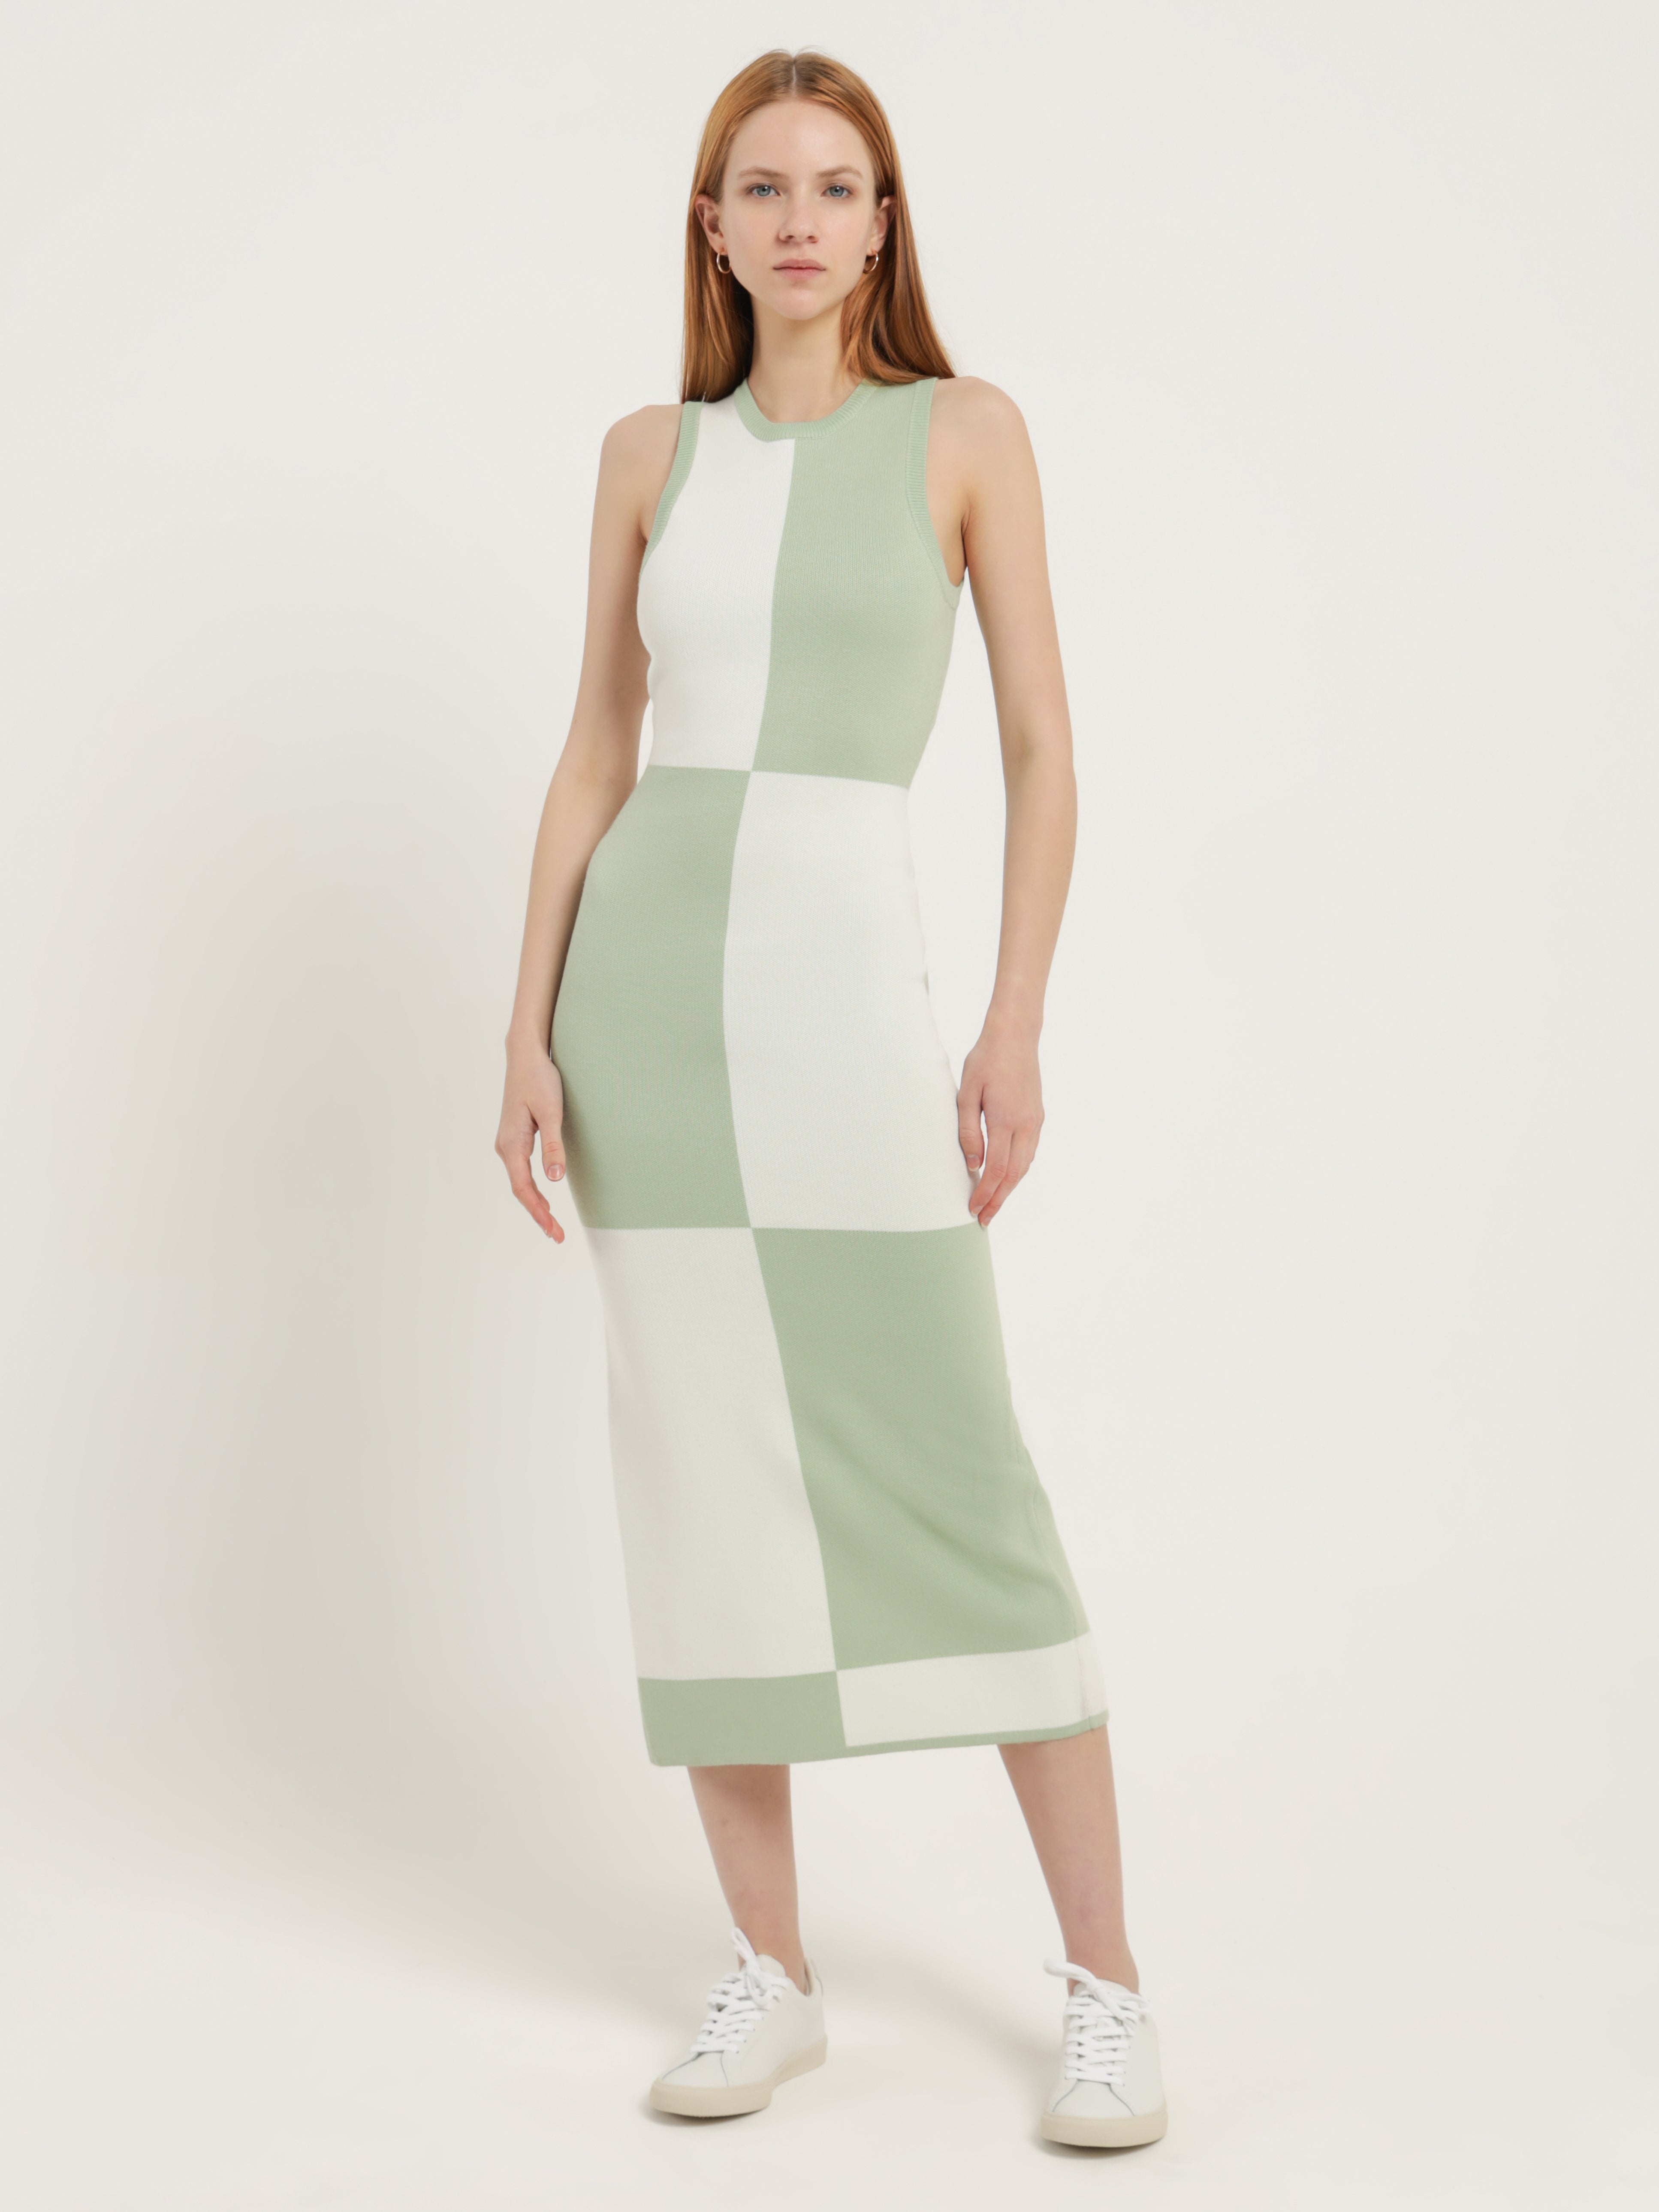 Check Mate Knit Dress in Lime Check